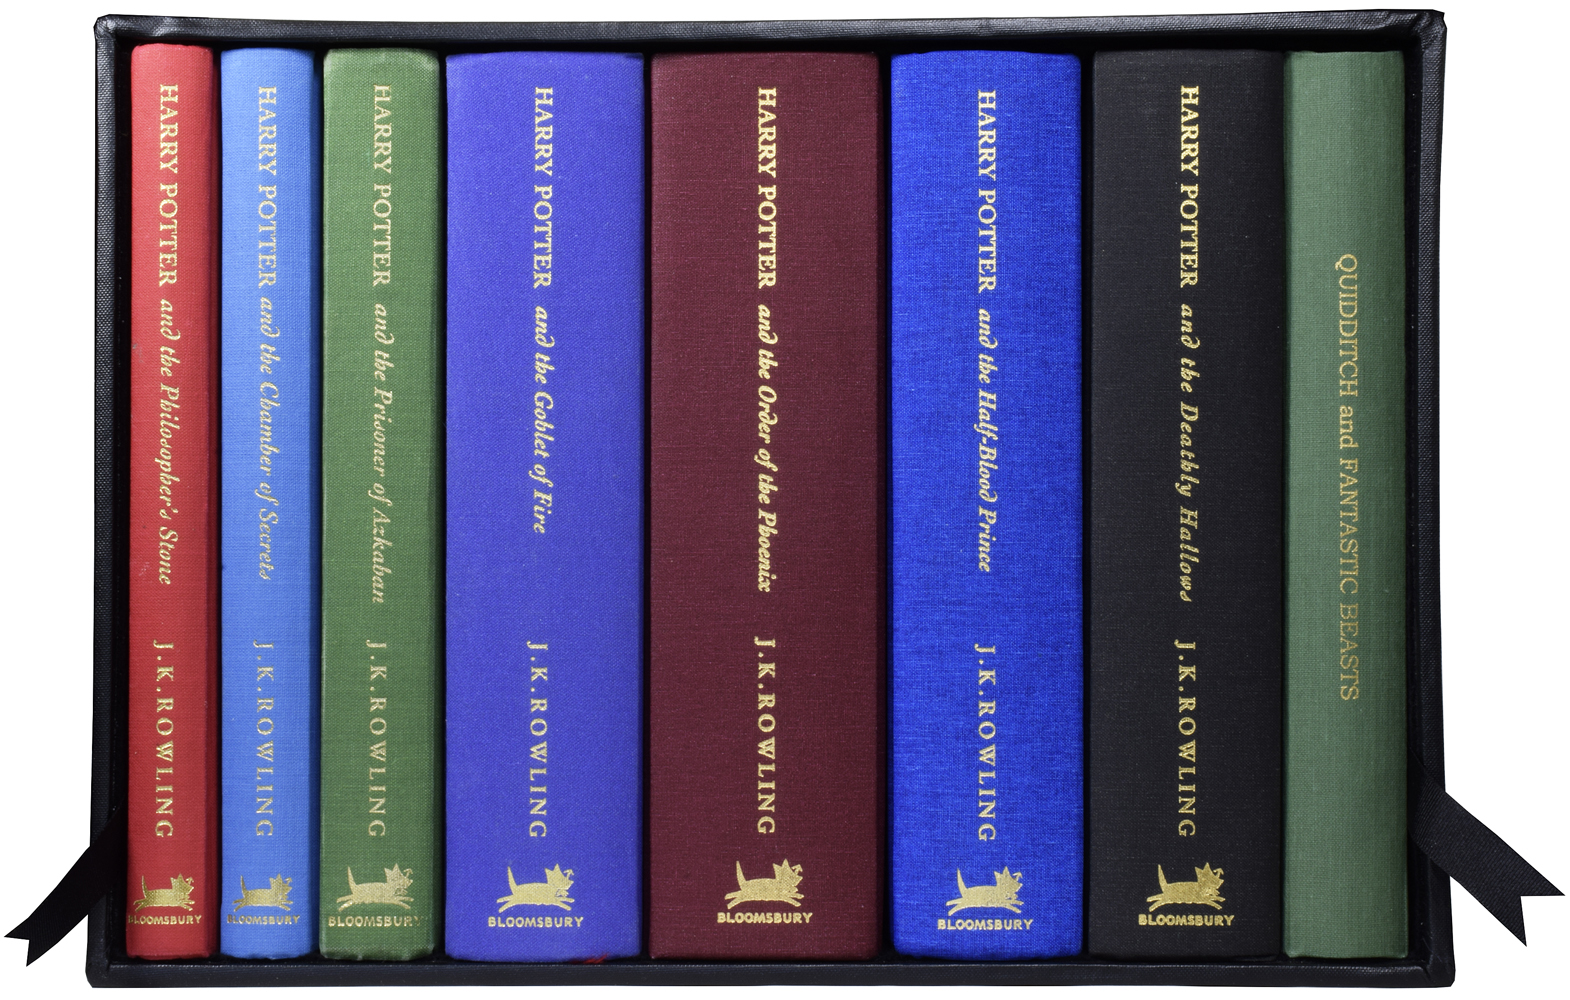 Lugar de nacimiento Disfraces idiota Harry Potter Series, Complete Deluxe Set, each with added colour  illustration. Being: The Philosopher's Stone; The Chamber of Secrets; The  Prisoner of Azkaban; The Goblet of Fire; The Order of The Phoenix;